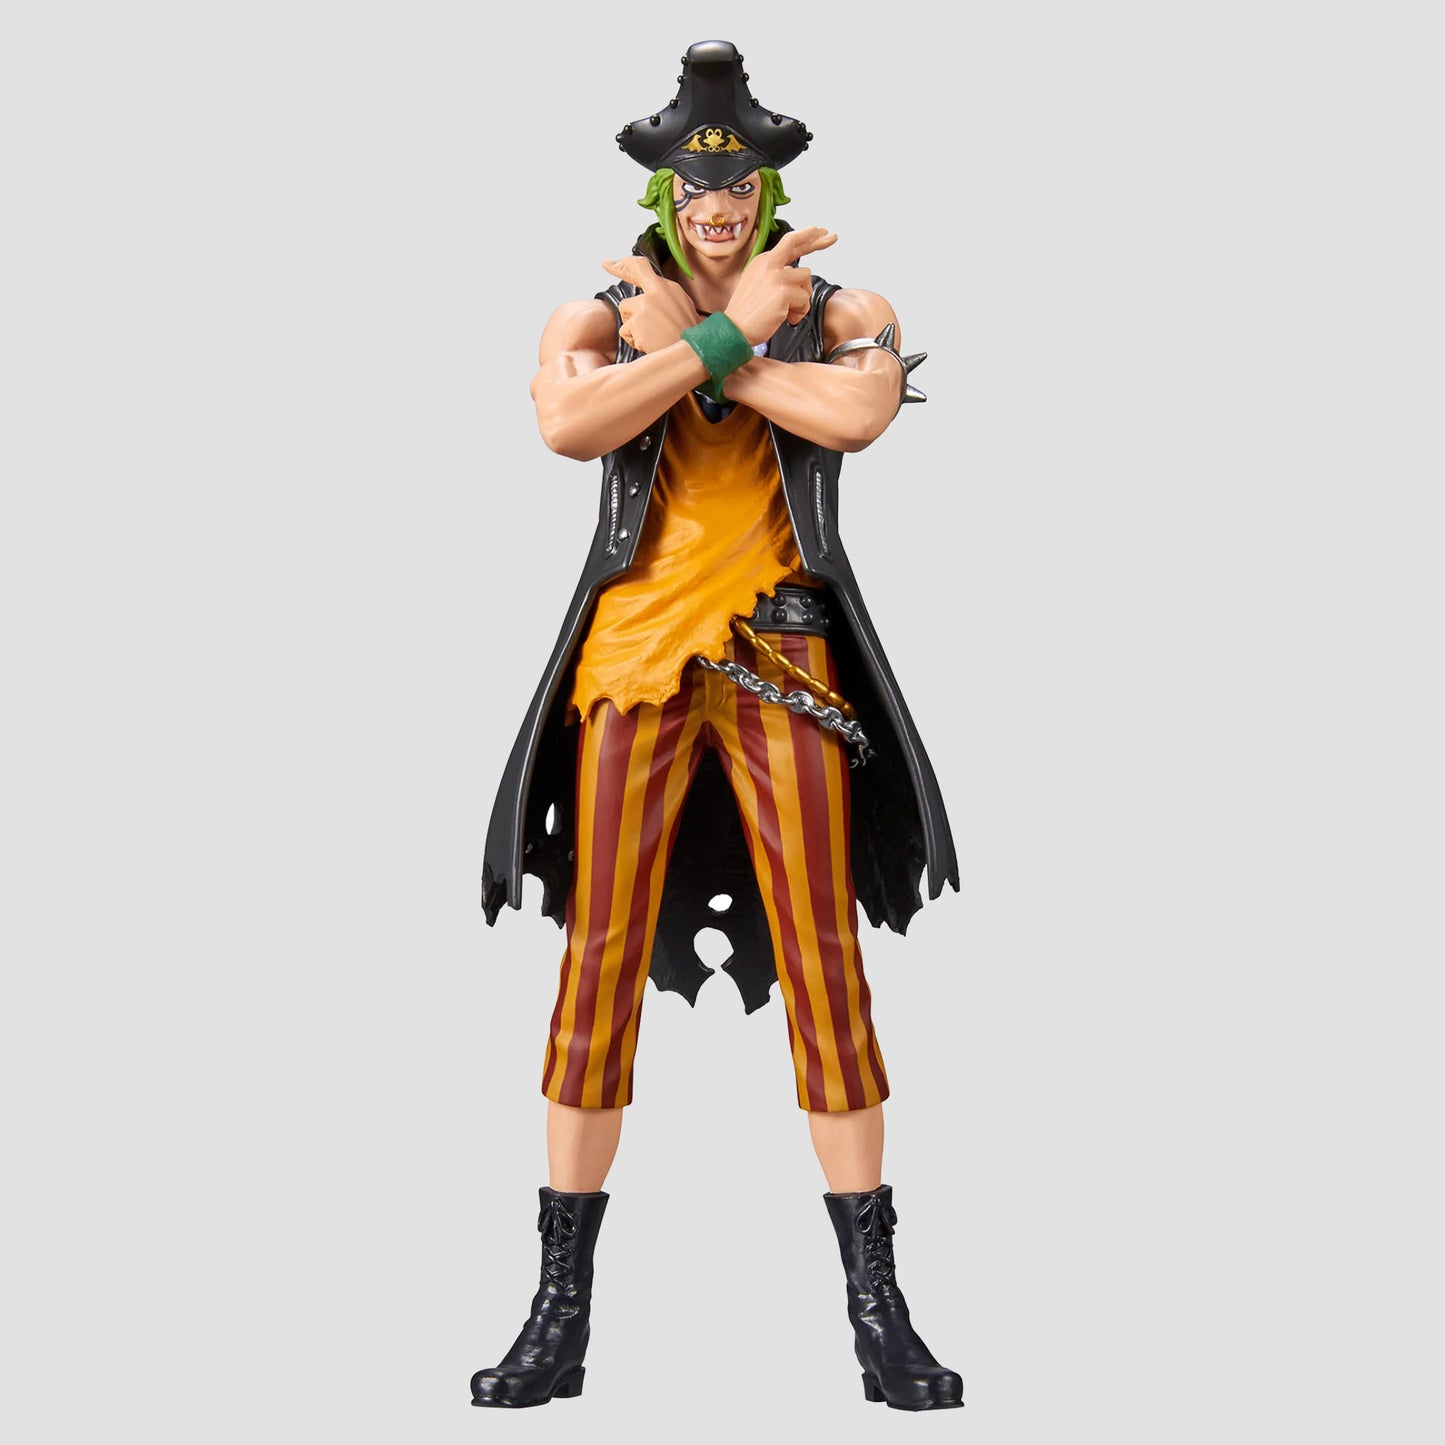 Load image into Gallery viewer, Bartolomeo (One Piece: Film Red) Vol. 11 The Grandline Men DXF Statue
